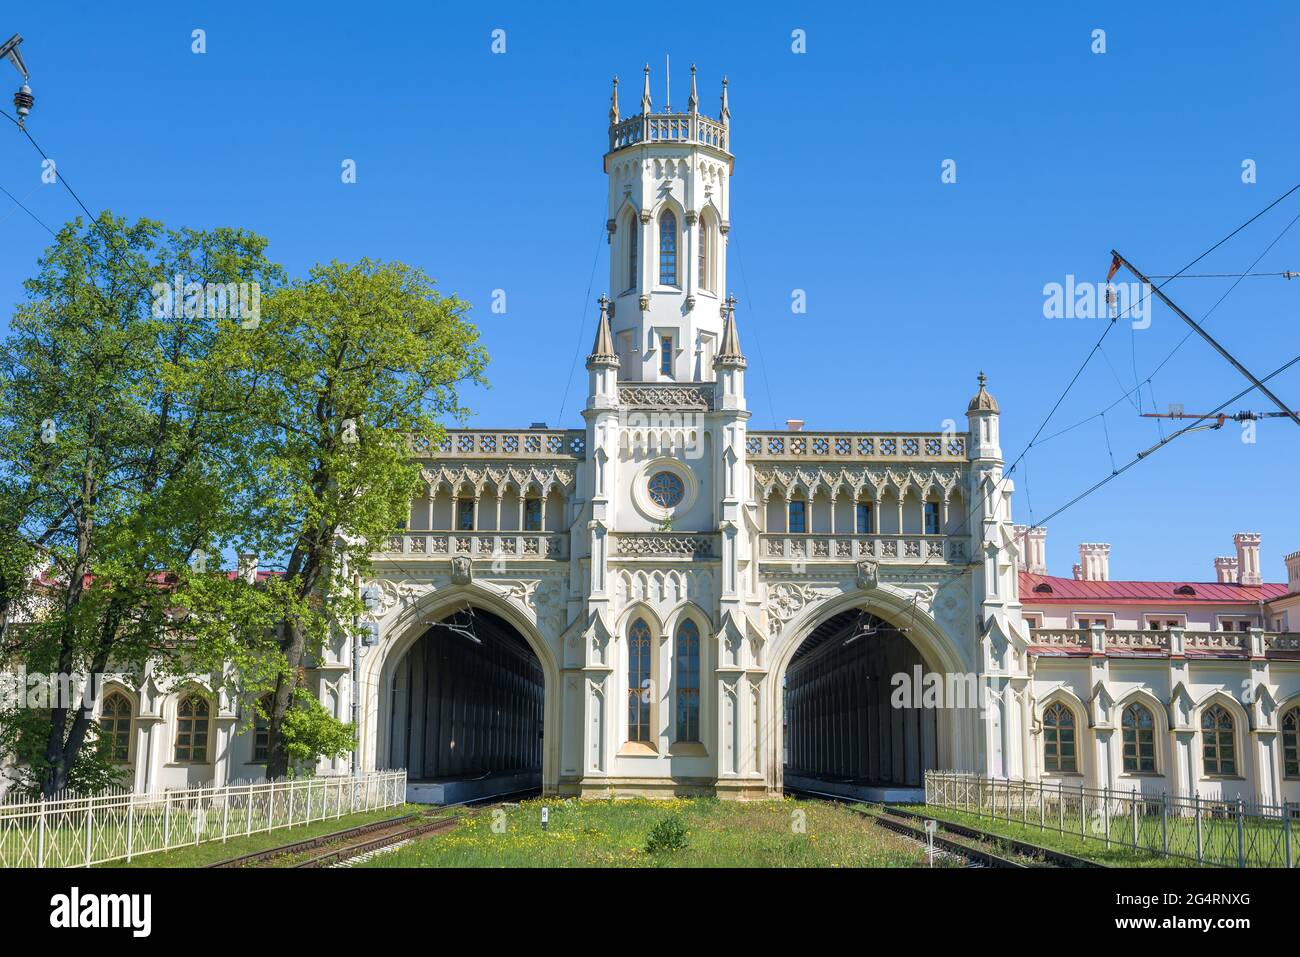 The old building of the New Peterhof railway station close-up on a sunny May day. Saint-Petersburg, Russia Stock Photo